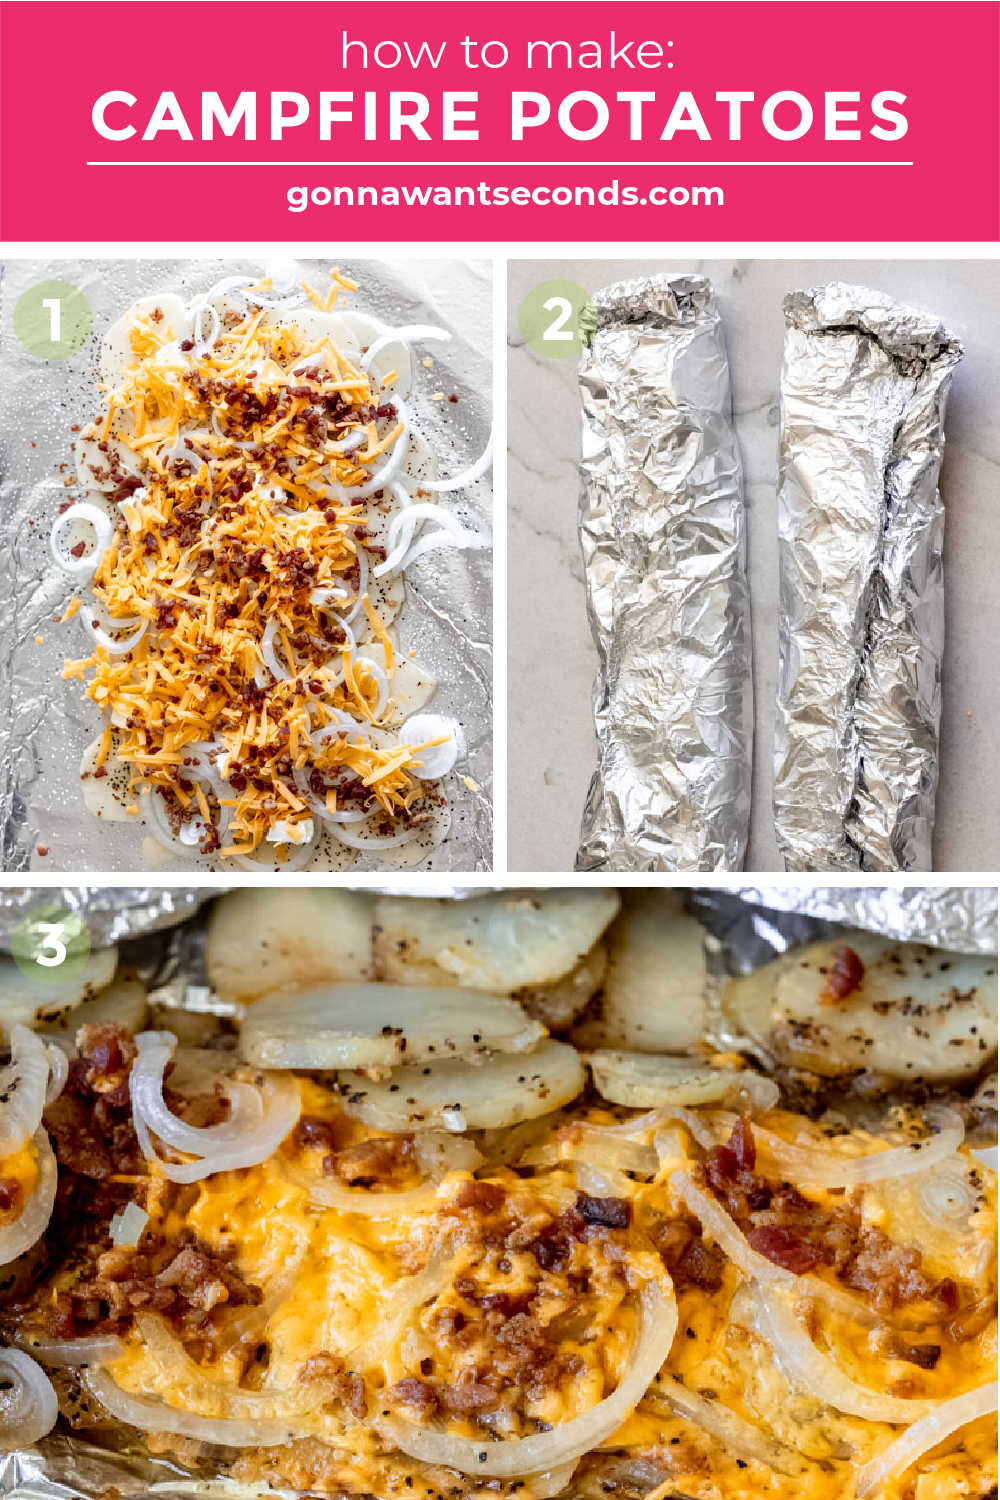 Step by step how to make campfire potatoes